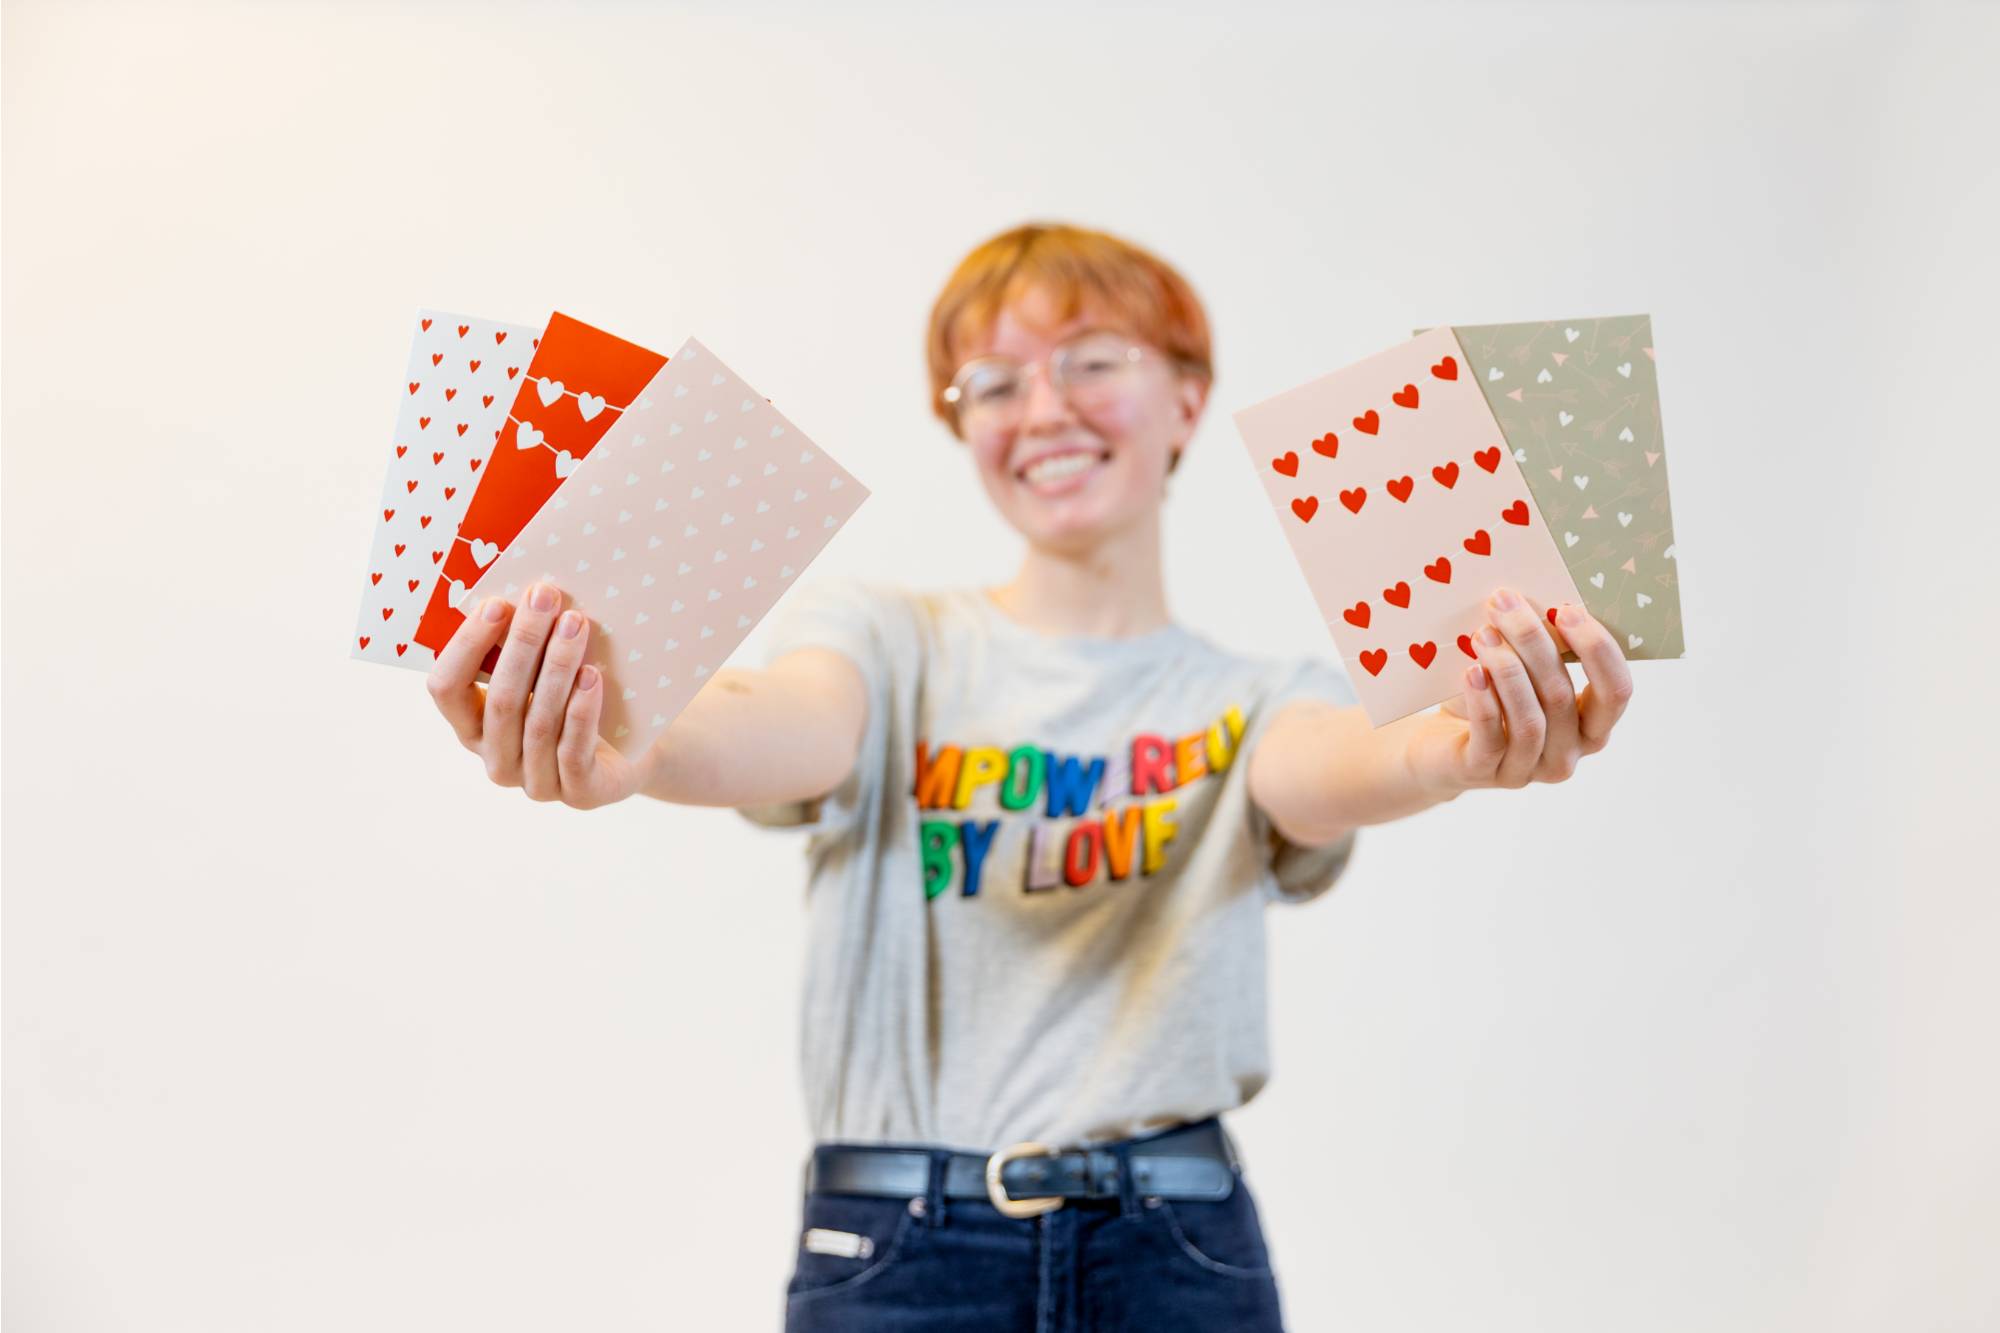 Student holding stickers at Valentine's day photoshoot